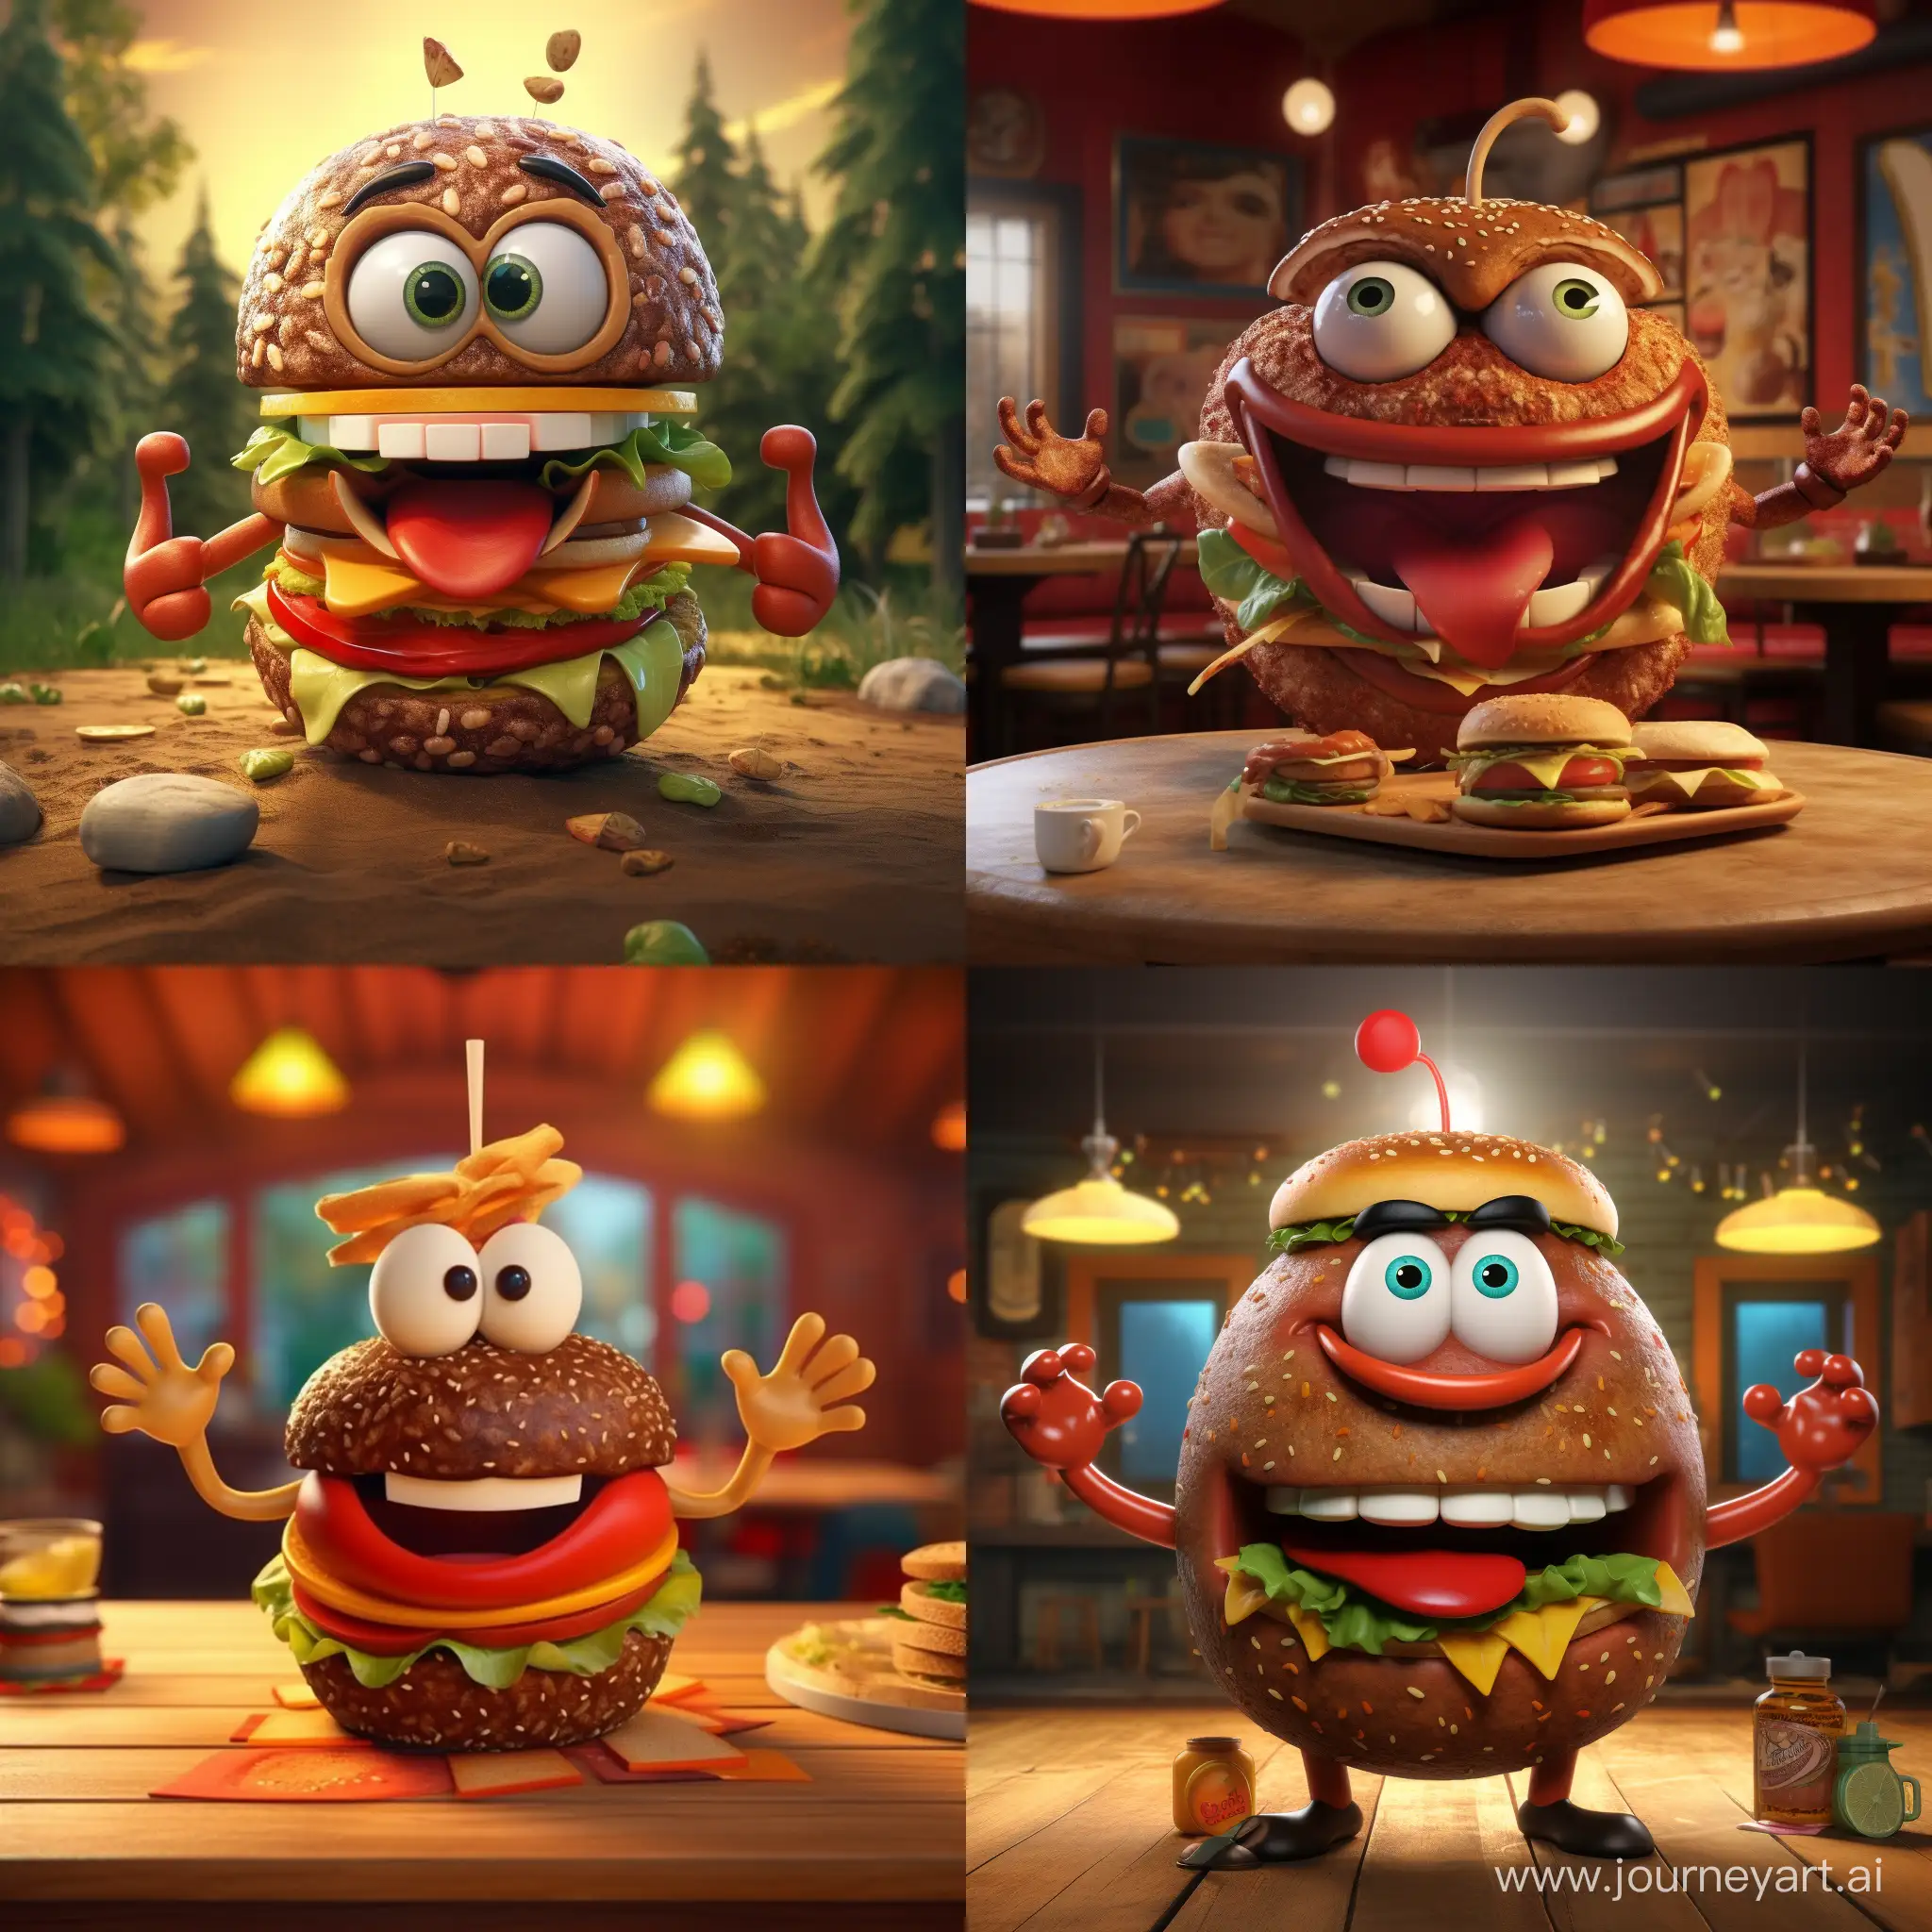 A big talking burger with arms, legs and eyes. 3D animation